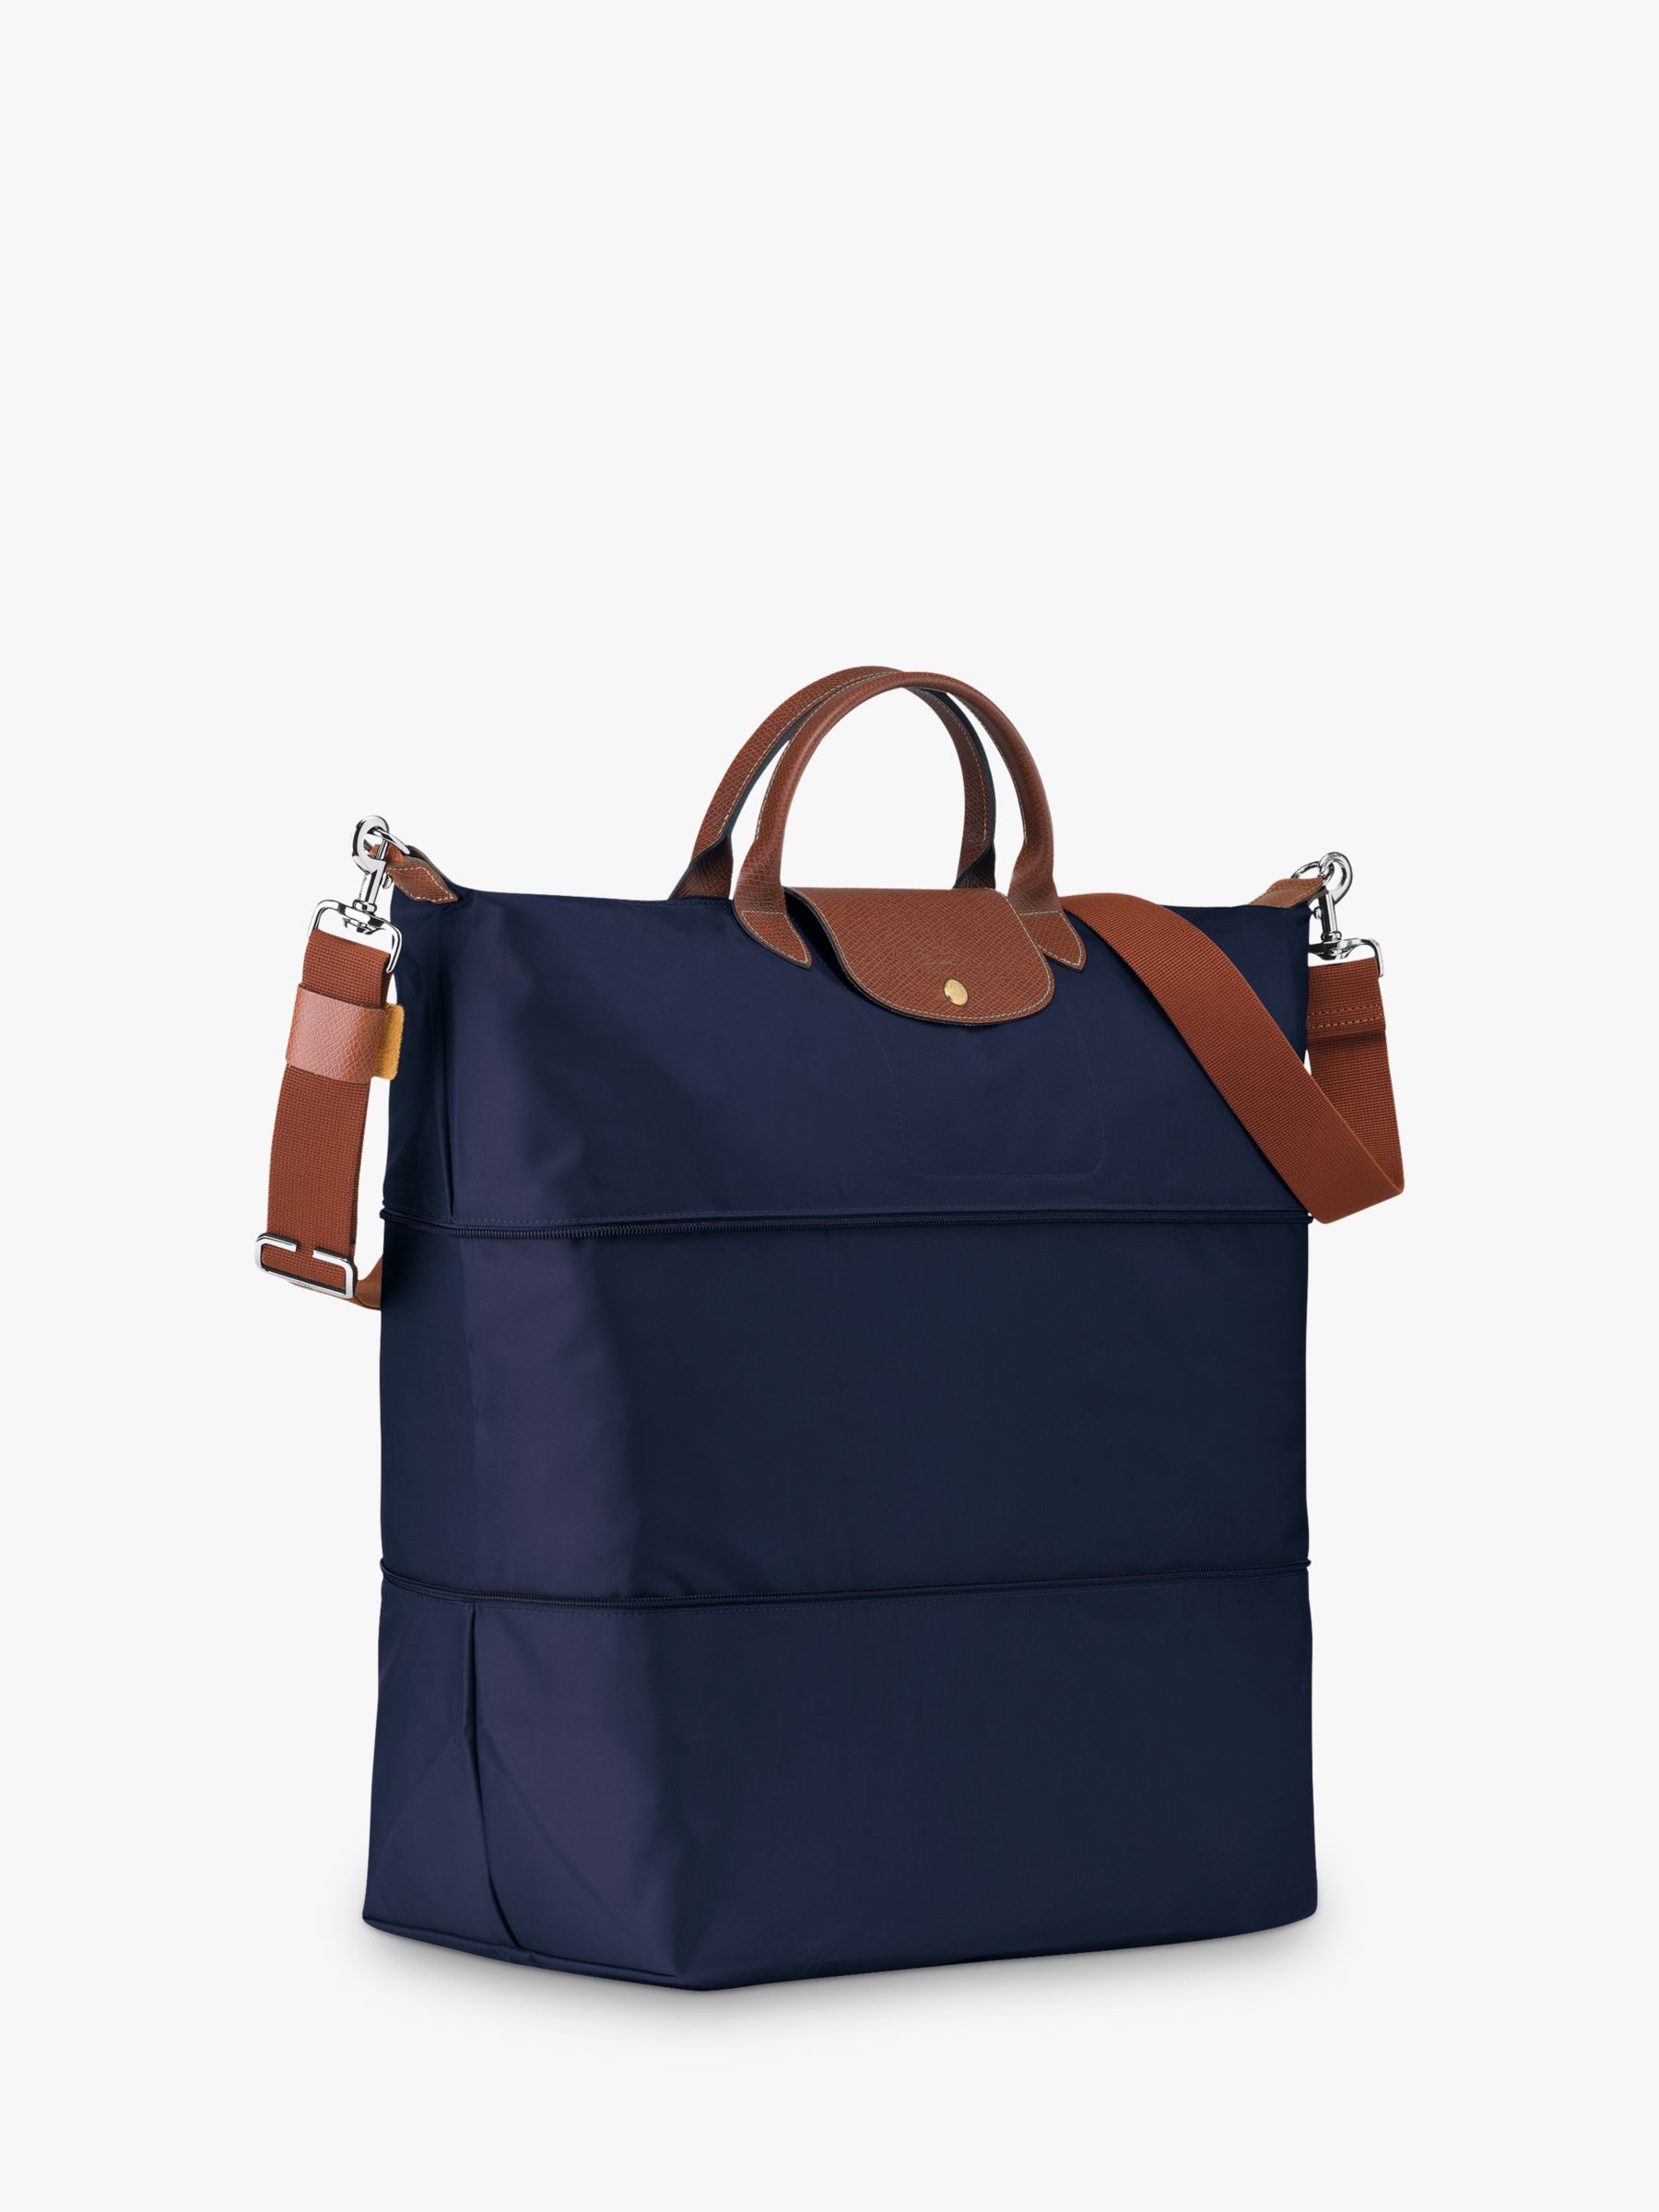 longchamp carry on tote